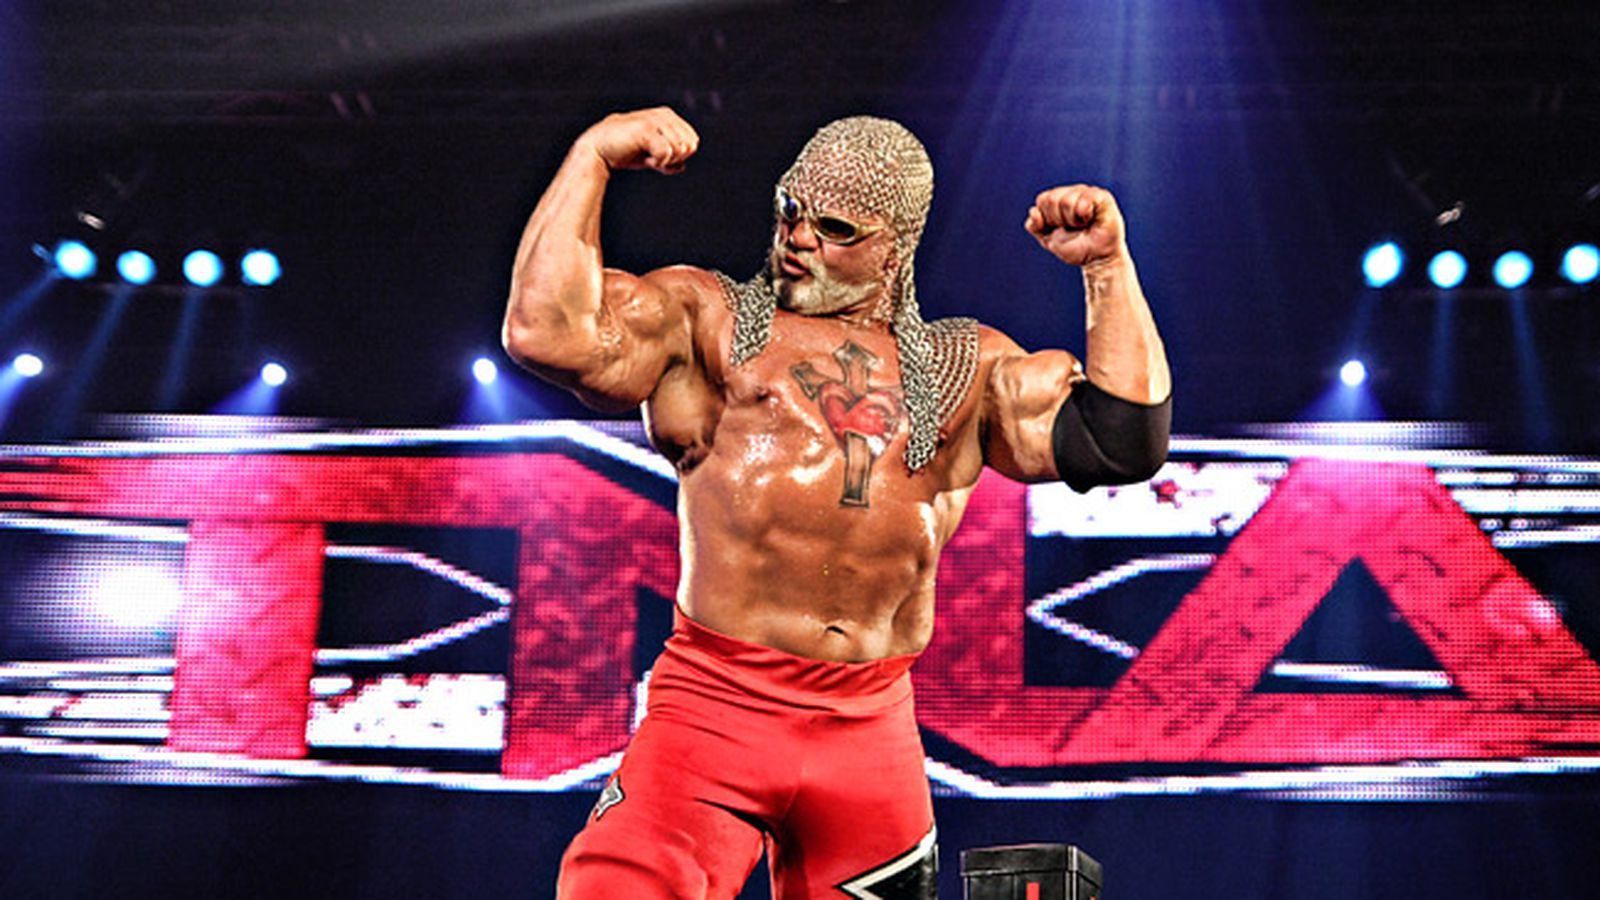 Issues that lead to Scott Steiner being banned from WWE Hall of Fame may have roots in Hulk Hogan's time with TNA